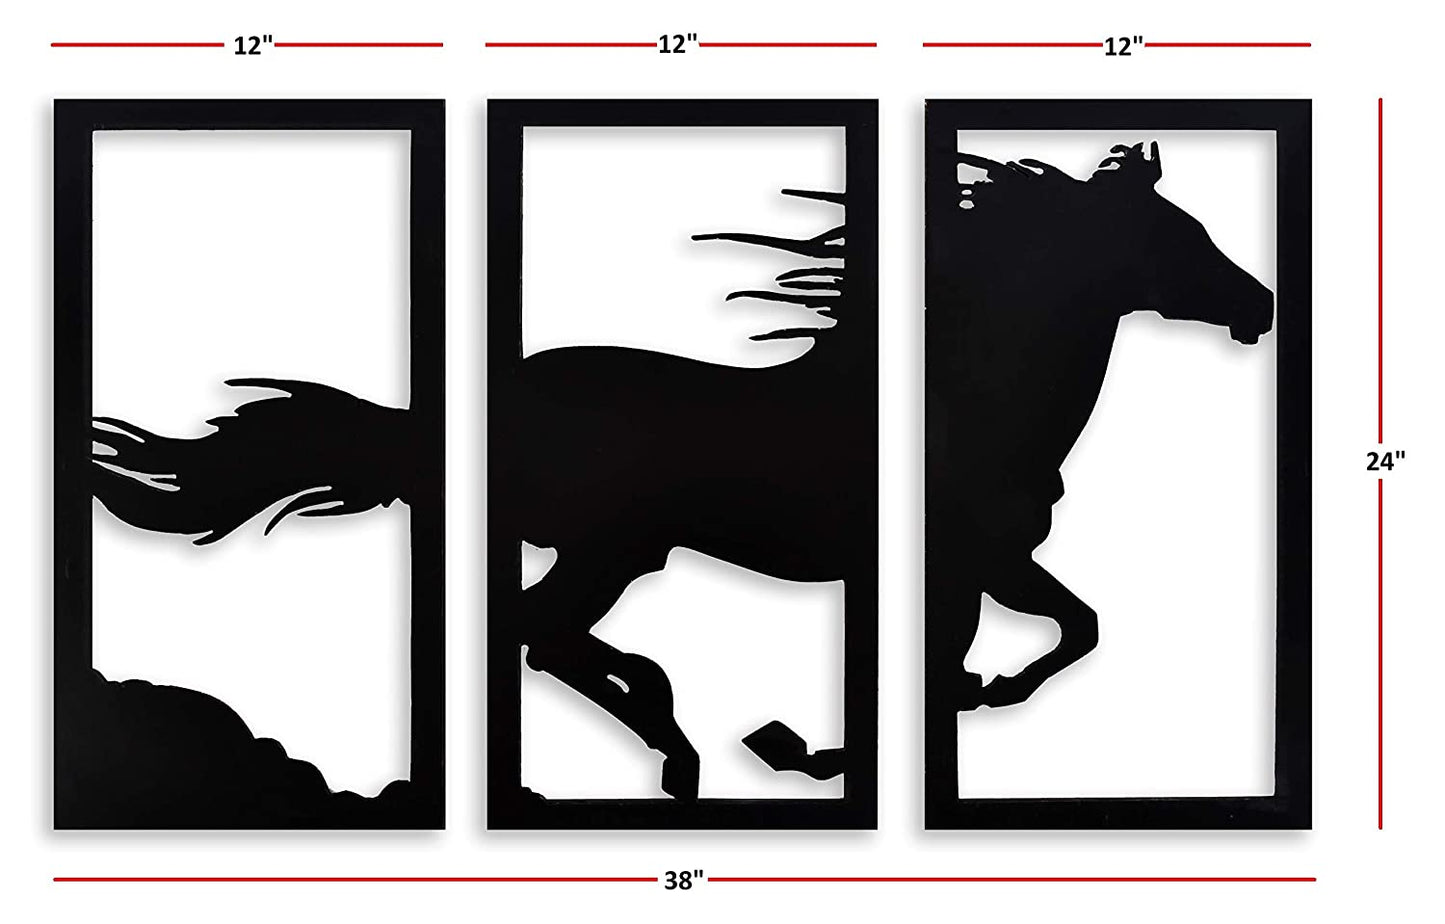 3D Horse Wall Hanging With Rustic Background Set of 3